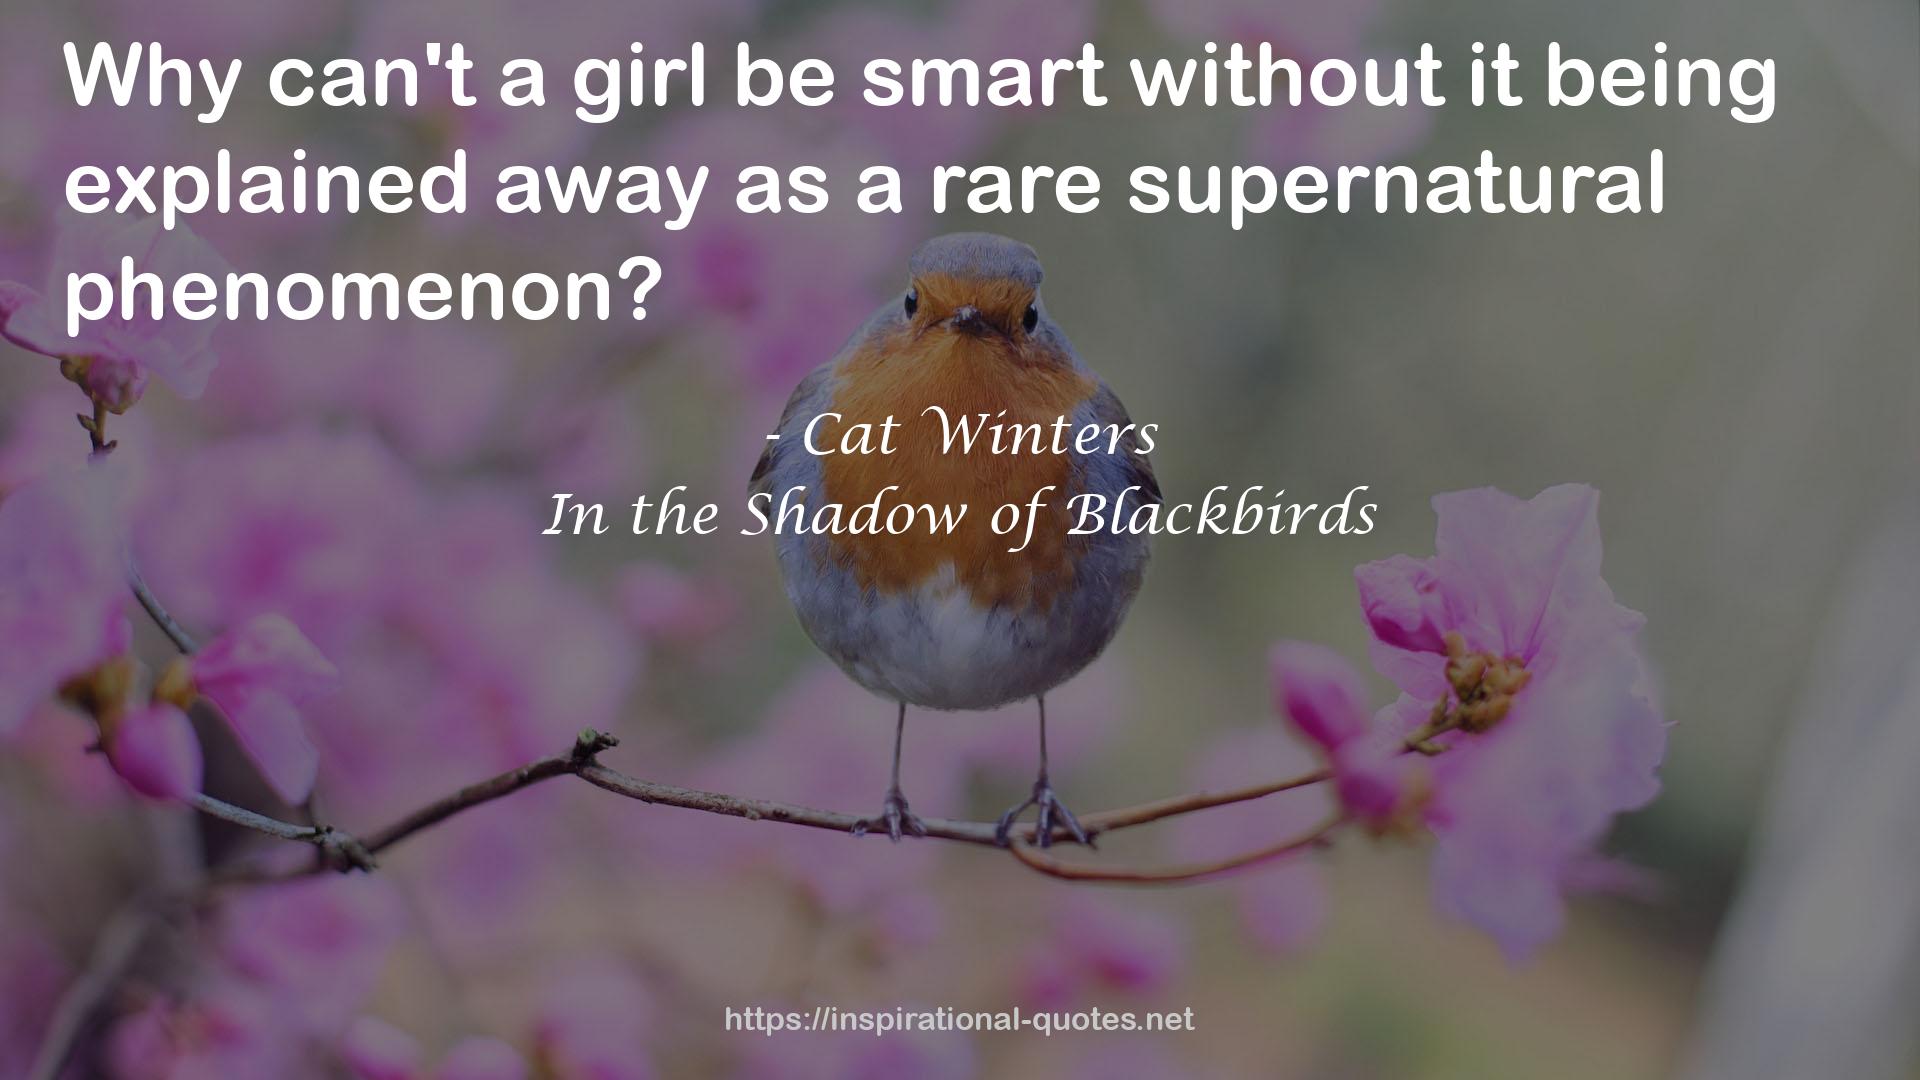 In the Shadow of Blackbirds QUOTES